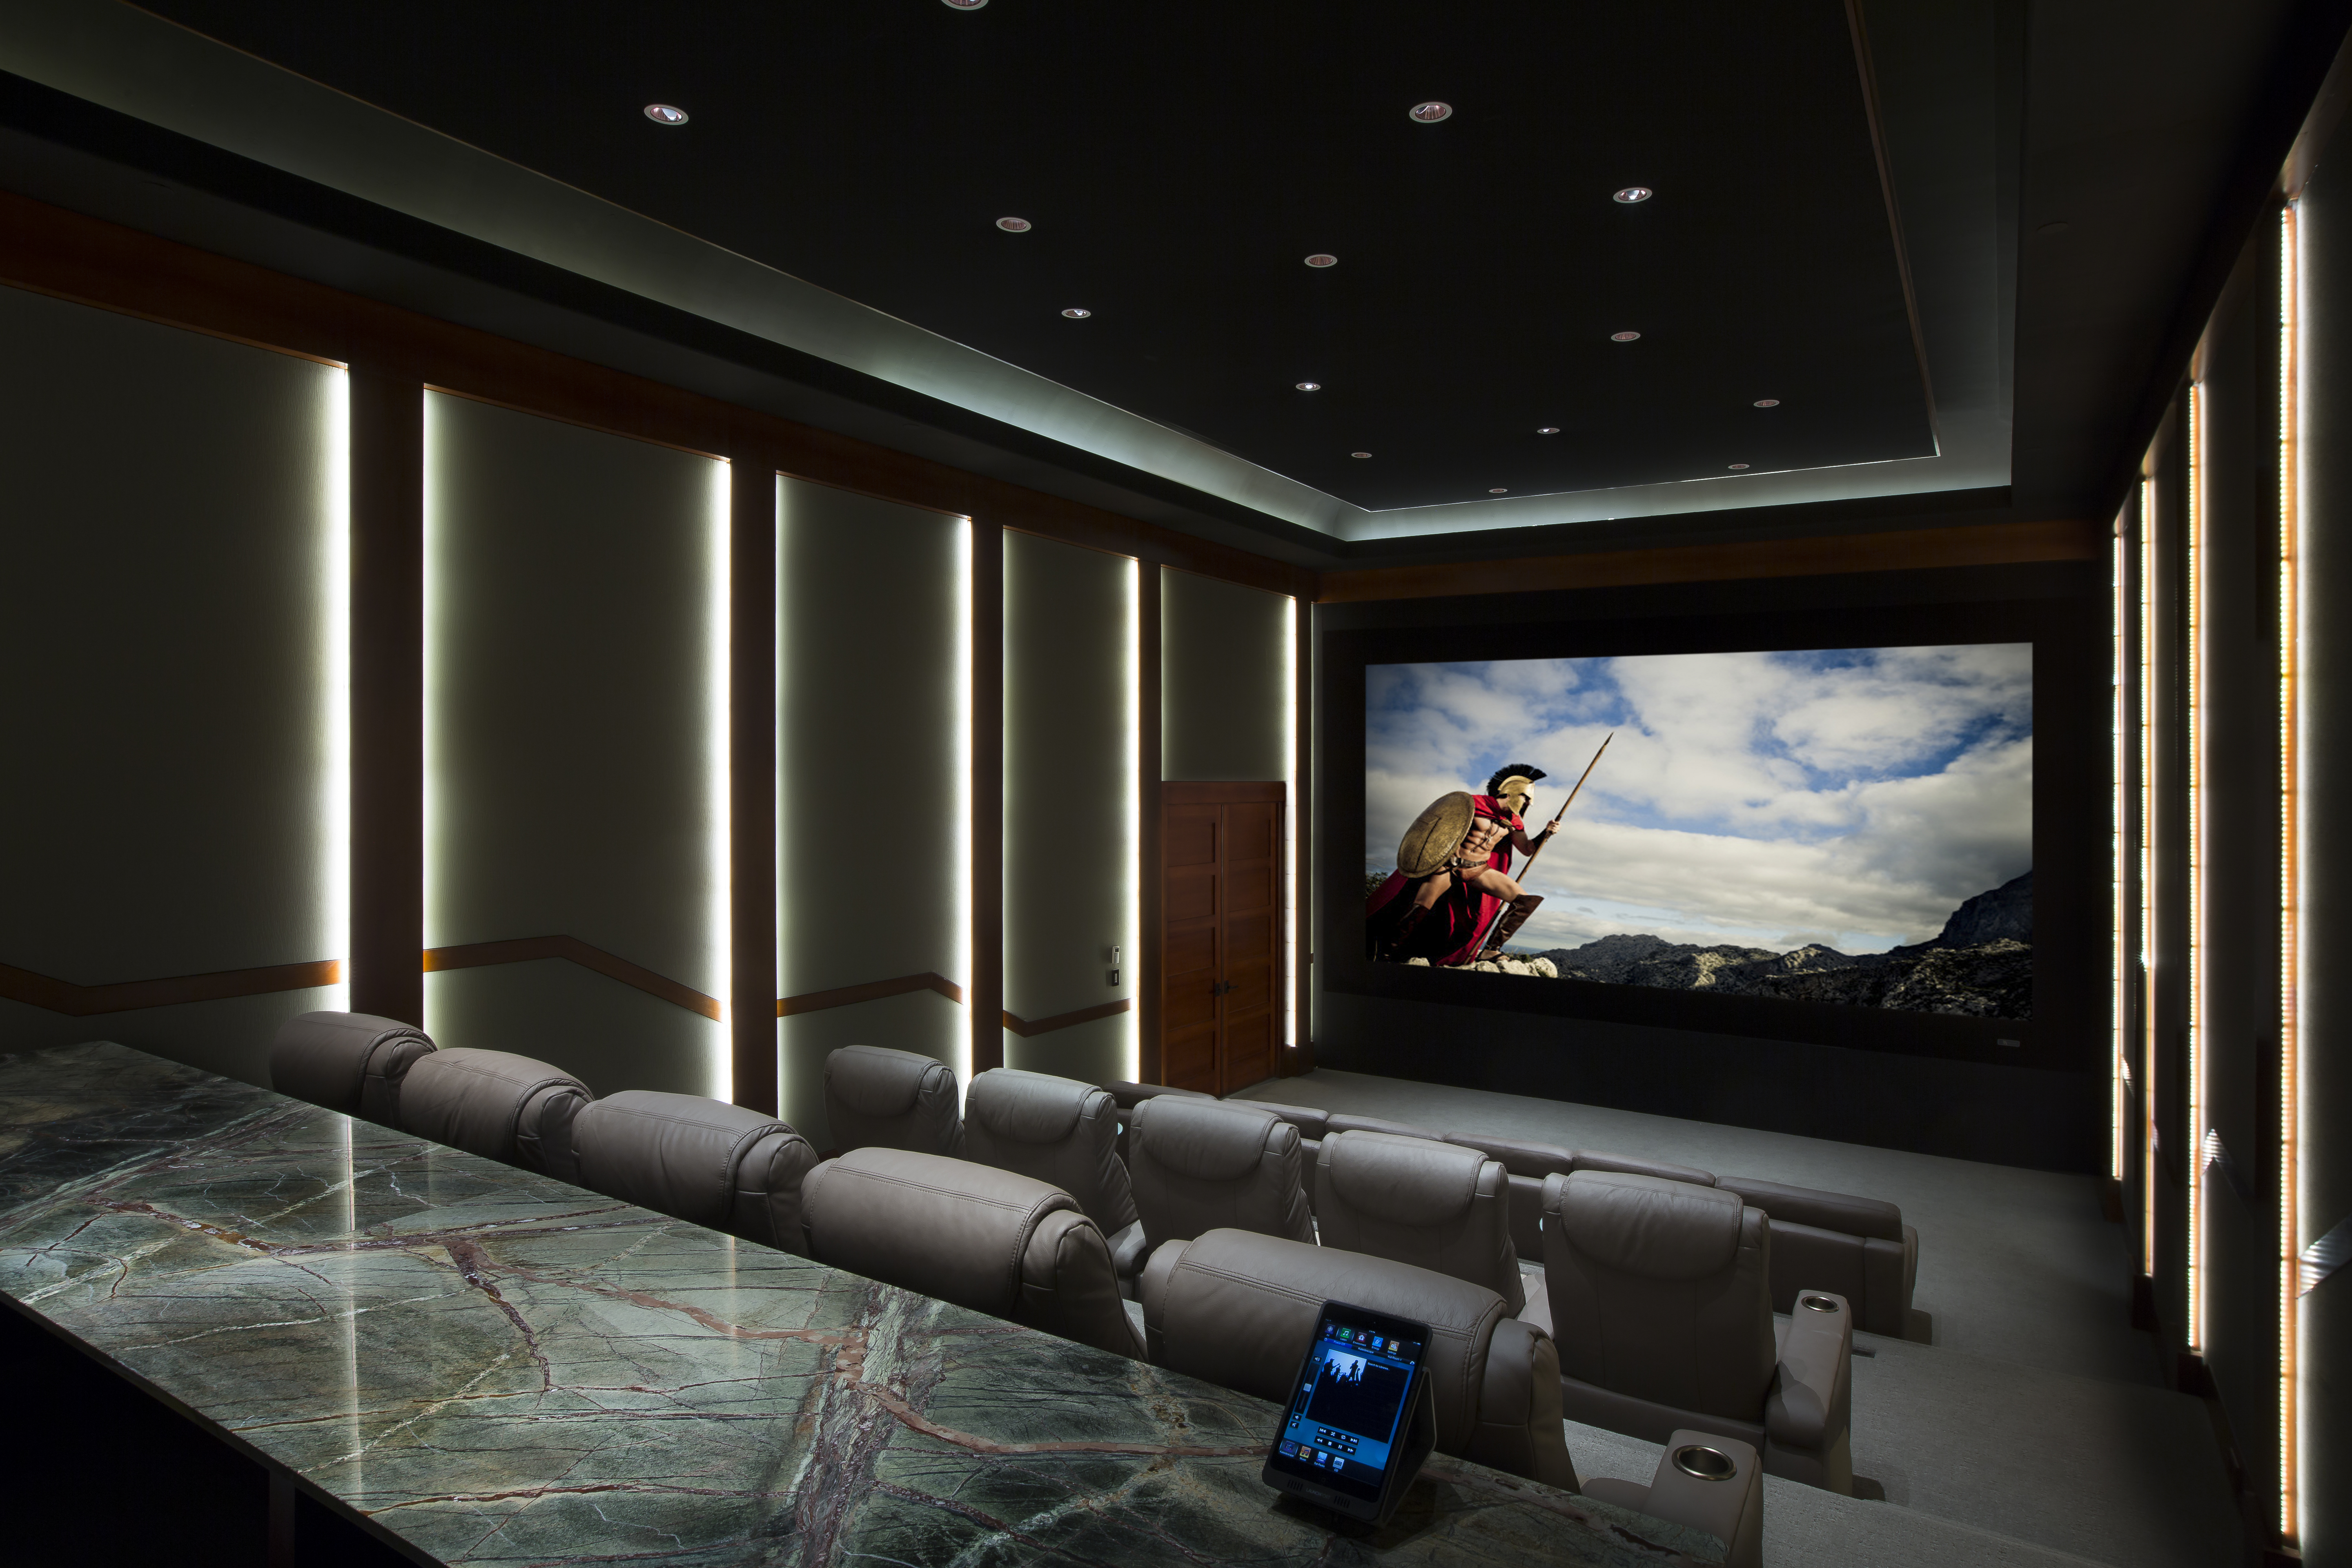 Black Home Theater Room: Enjoy A Captivating Cinema Experience At Home